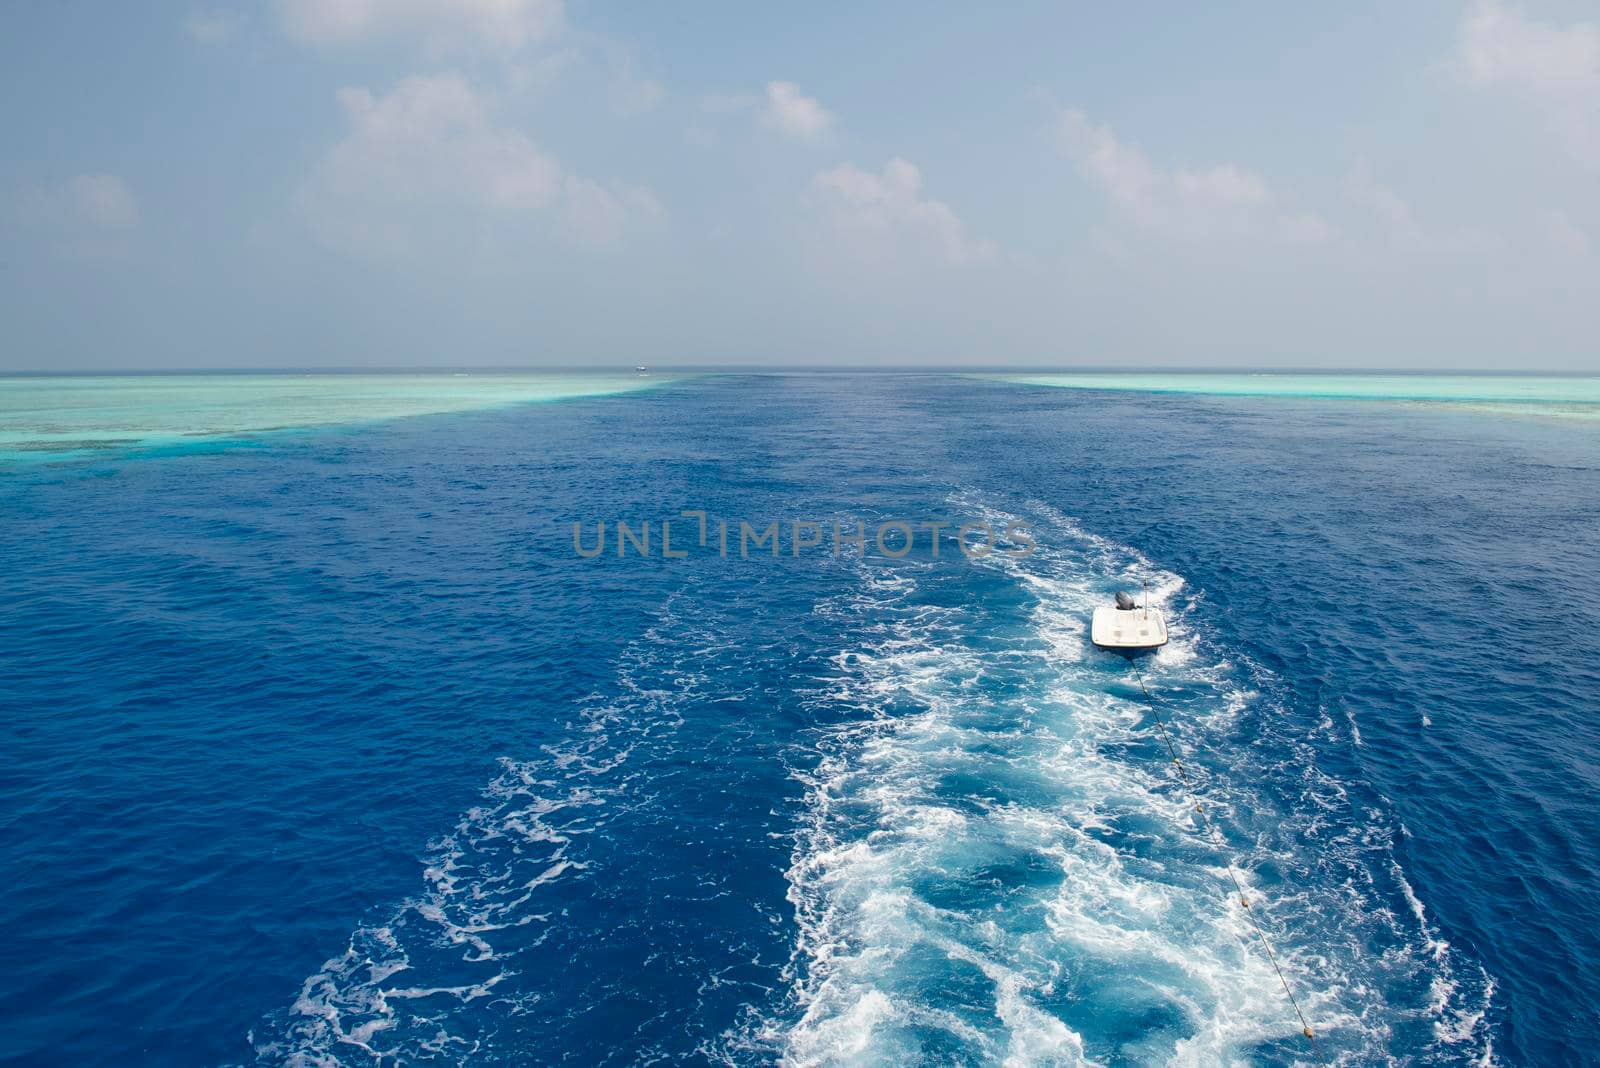 Panoramic scenic view of seascape over tropical ocean through channel in coral reef atoll with boat wake